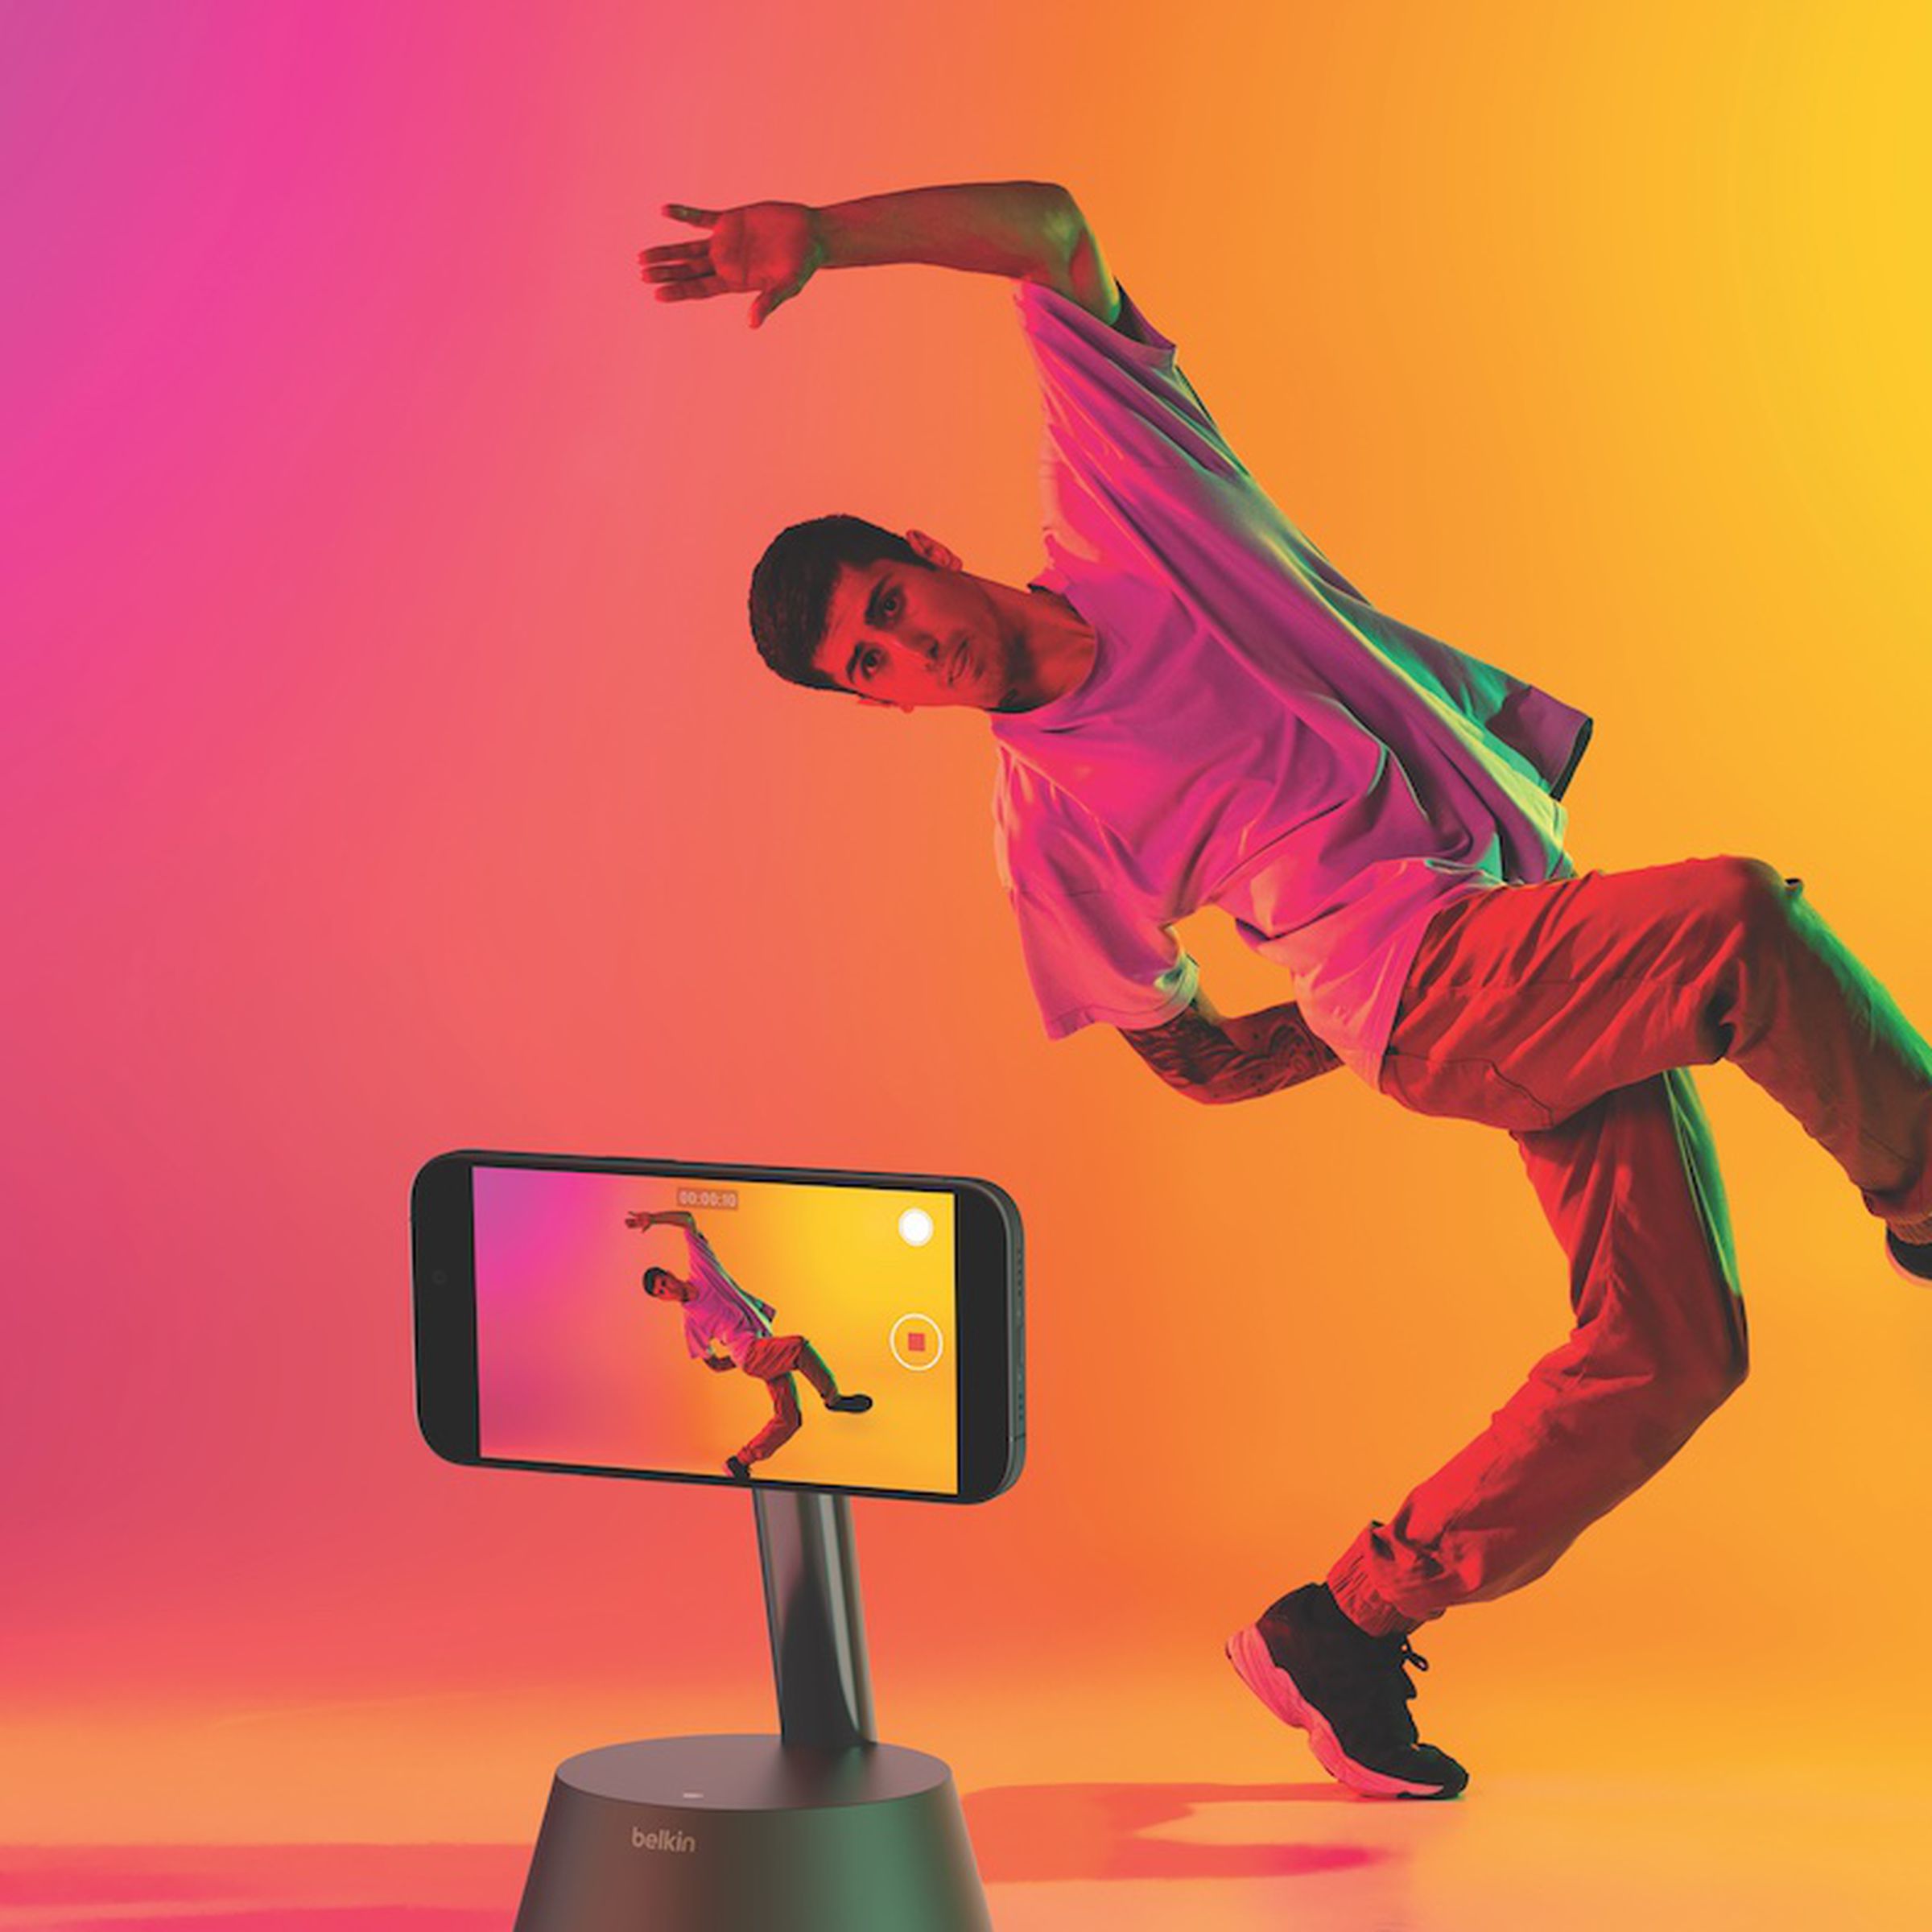 An image showing a person dancing in front of the Belkin Stand Pro